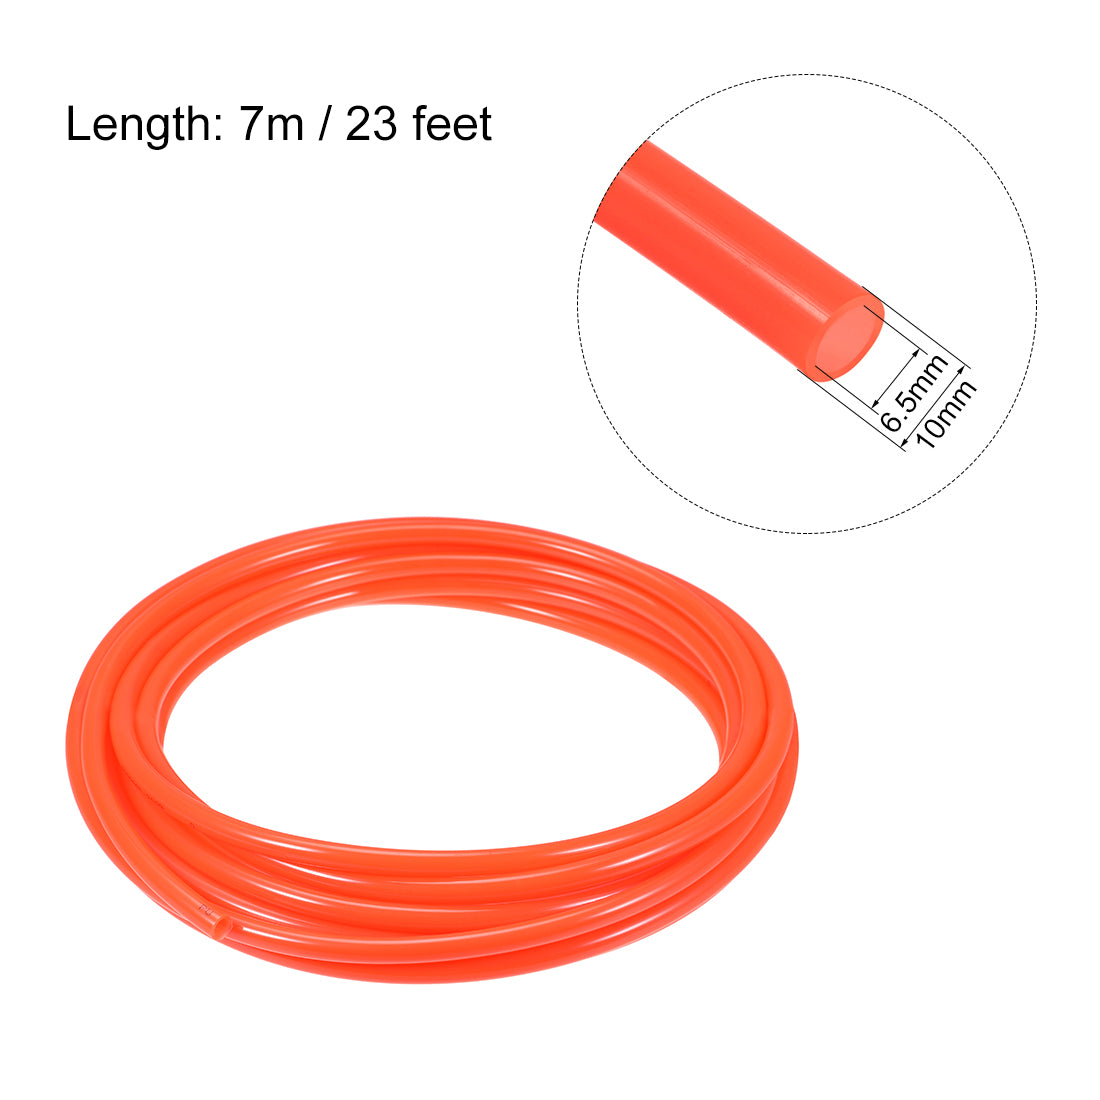 Uxcell Uxcell 10mm OD 6.5mm ID 7m Long Orange PU Air Tubing Pipe Hose for Air Line Tube Fluid Transfer Pneumatic Tubing